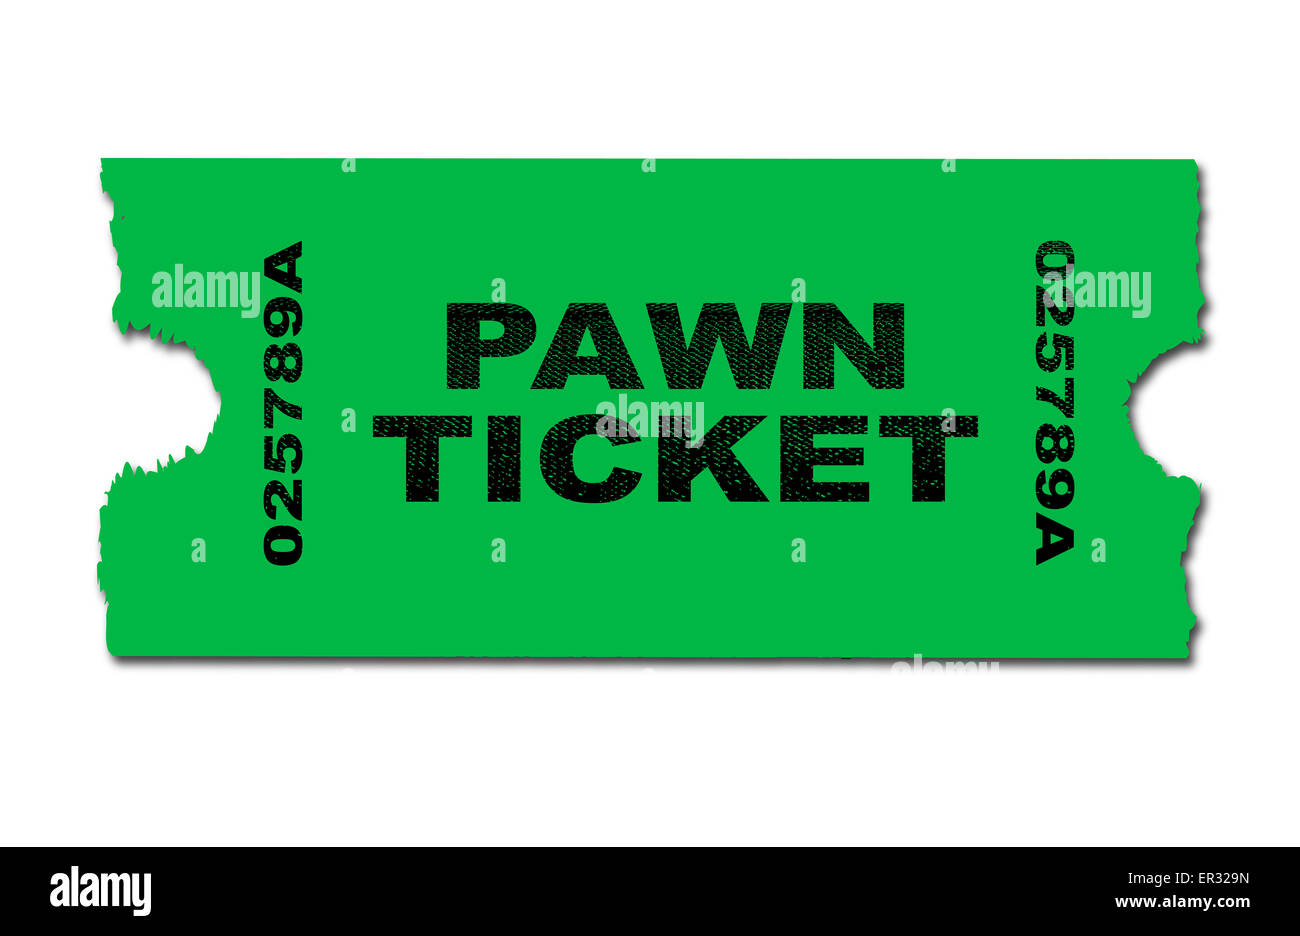 A green pawn ticket over a white background Stock Photo